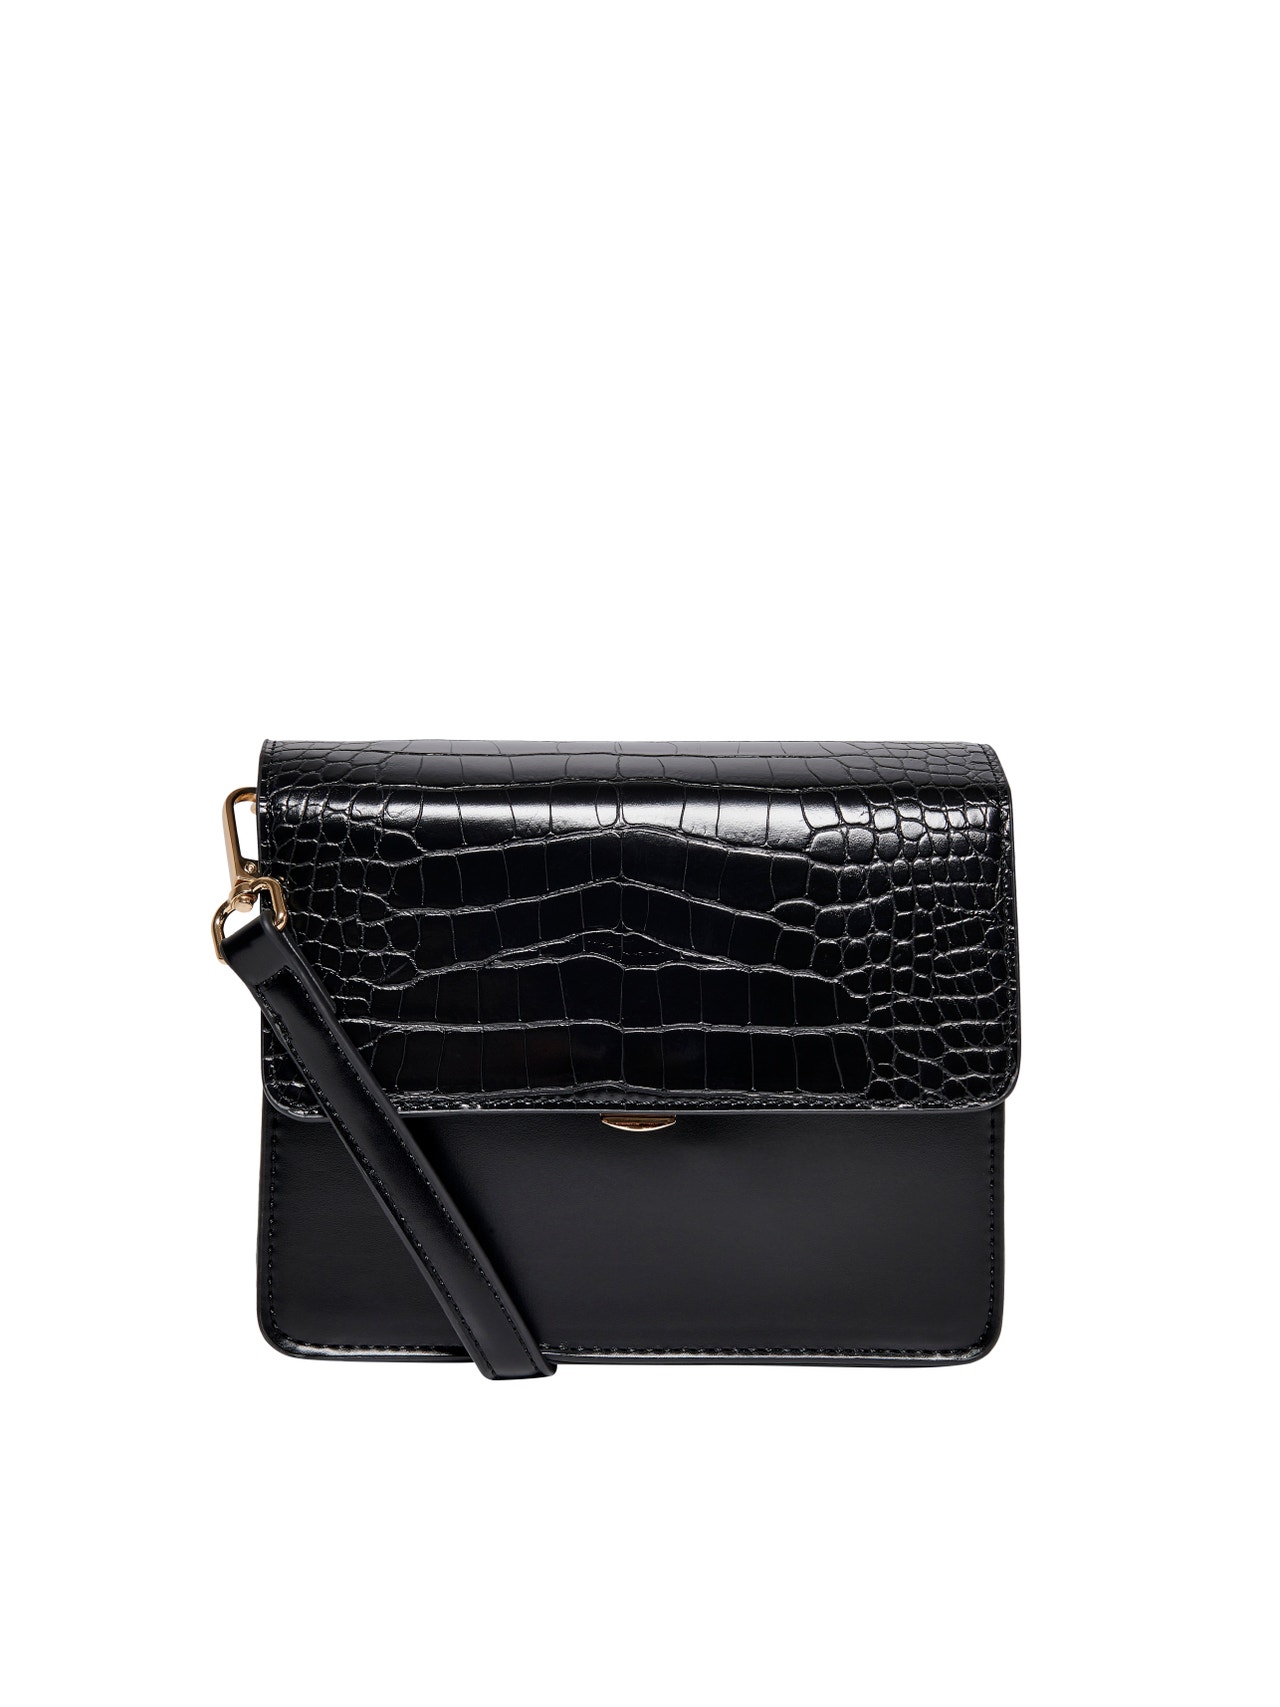 ONLY Leather look Crossbody Bag -Black - 15197105